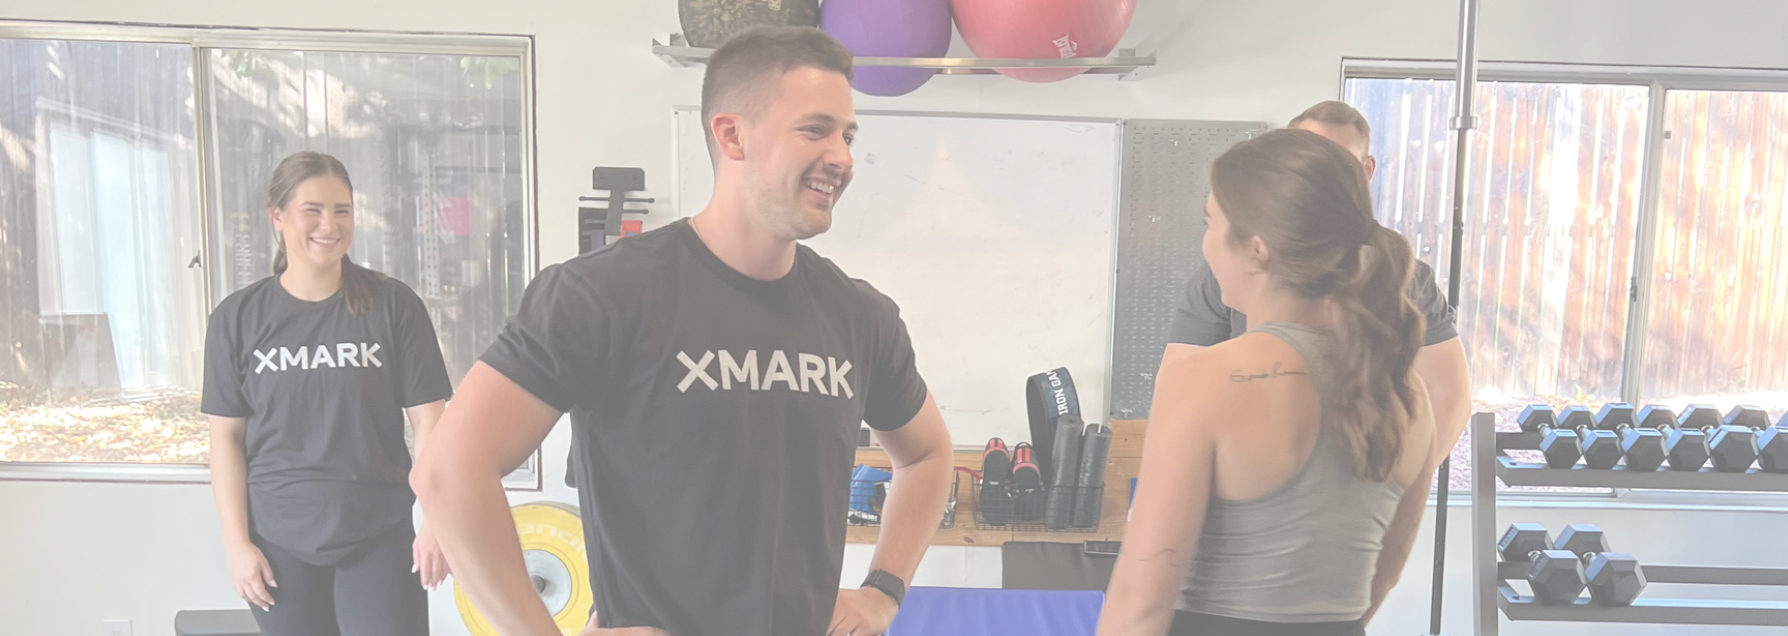 Three smiling people wearing XMARK tshirts in a gym